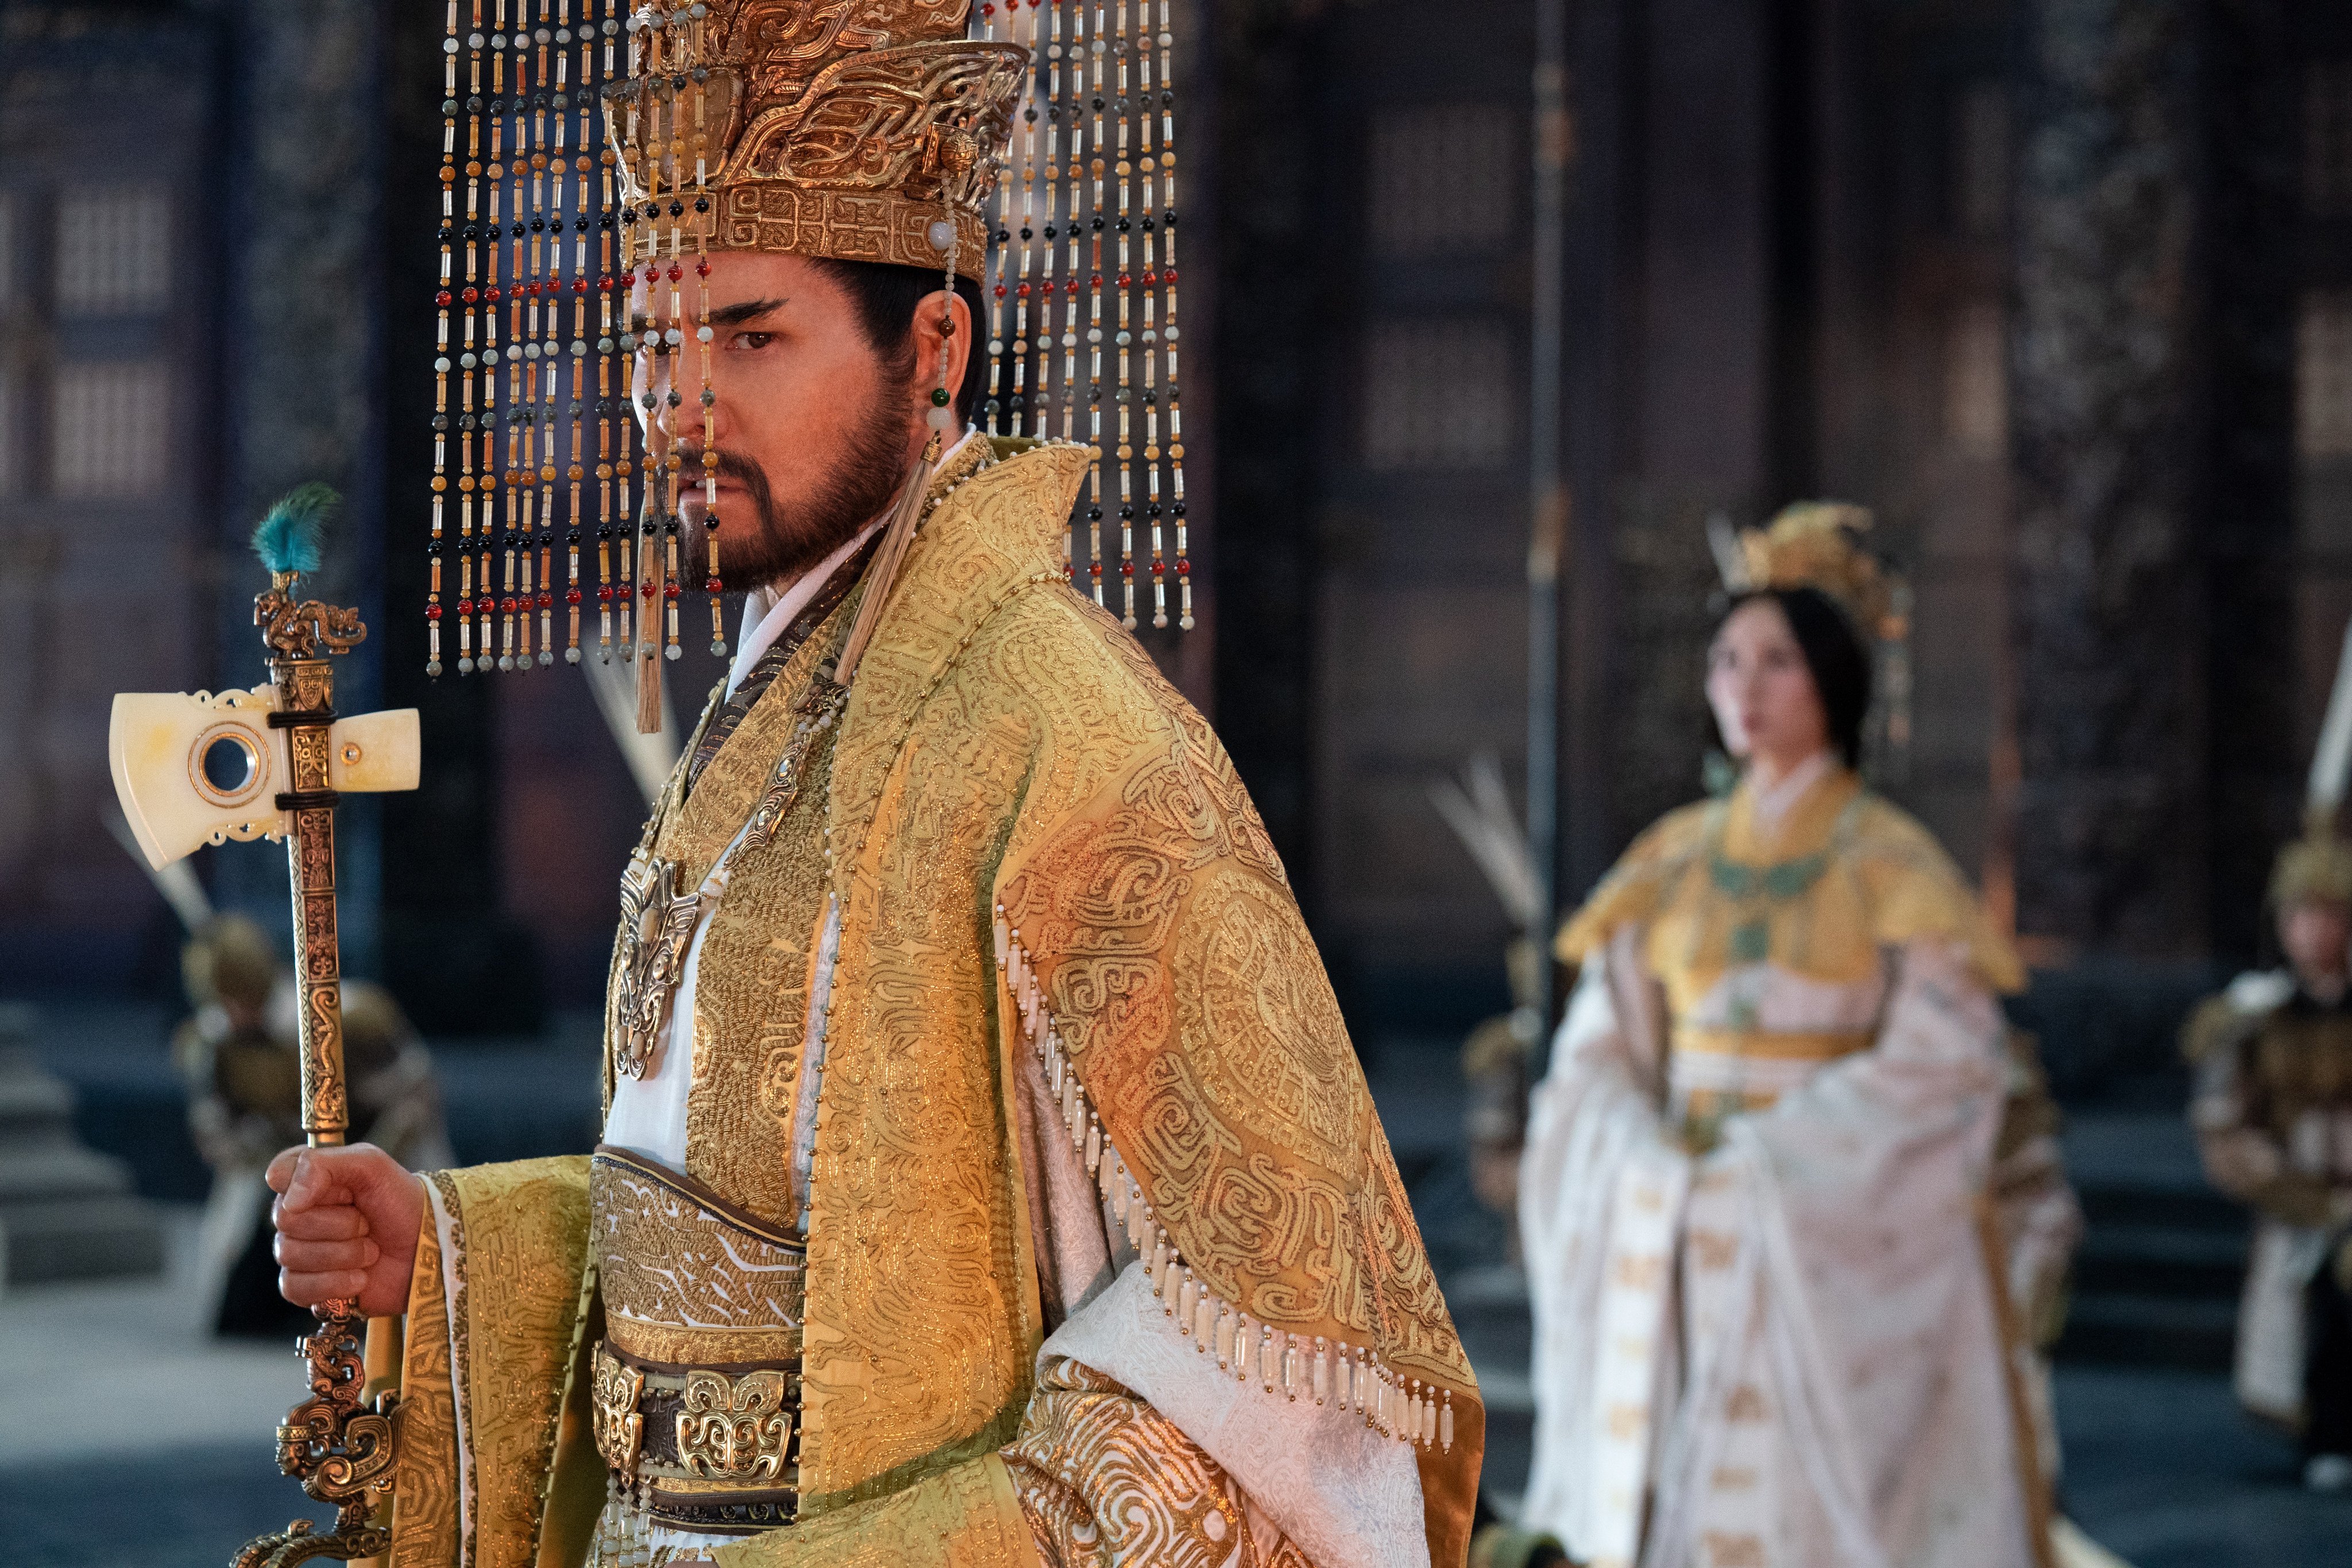 Kris Phillips as power-hungry Lord Yin Shou in a still from “Creation of the Gods I: Kingdom of Storms” (category: IIB Mandarin. Directed by Wuershan.